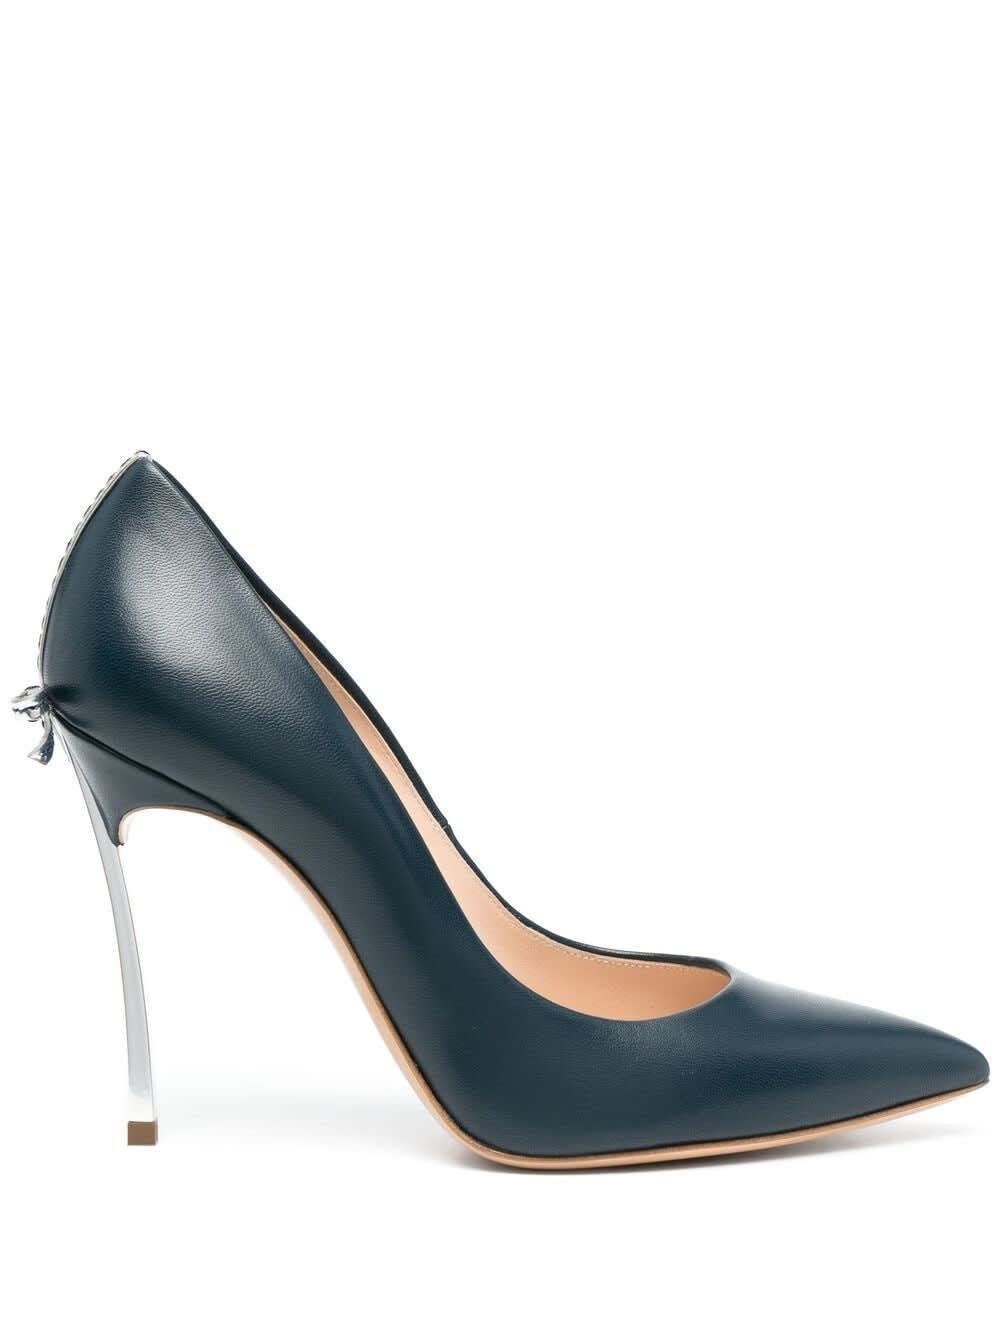 Casadei BLUE BLADE PUMPS WITH BOW DETAIL